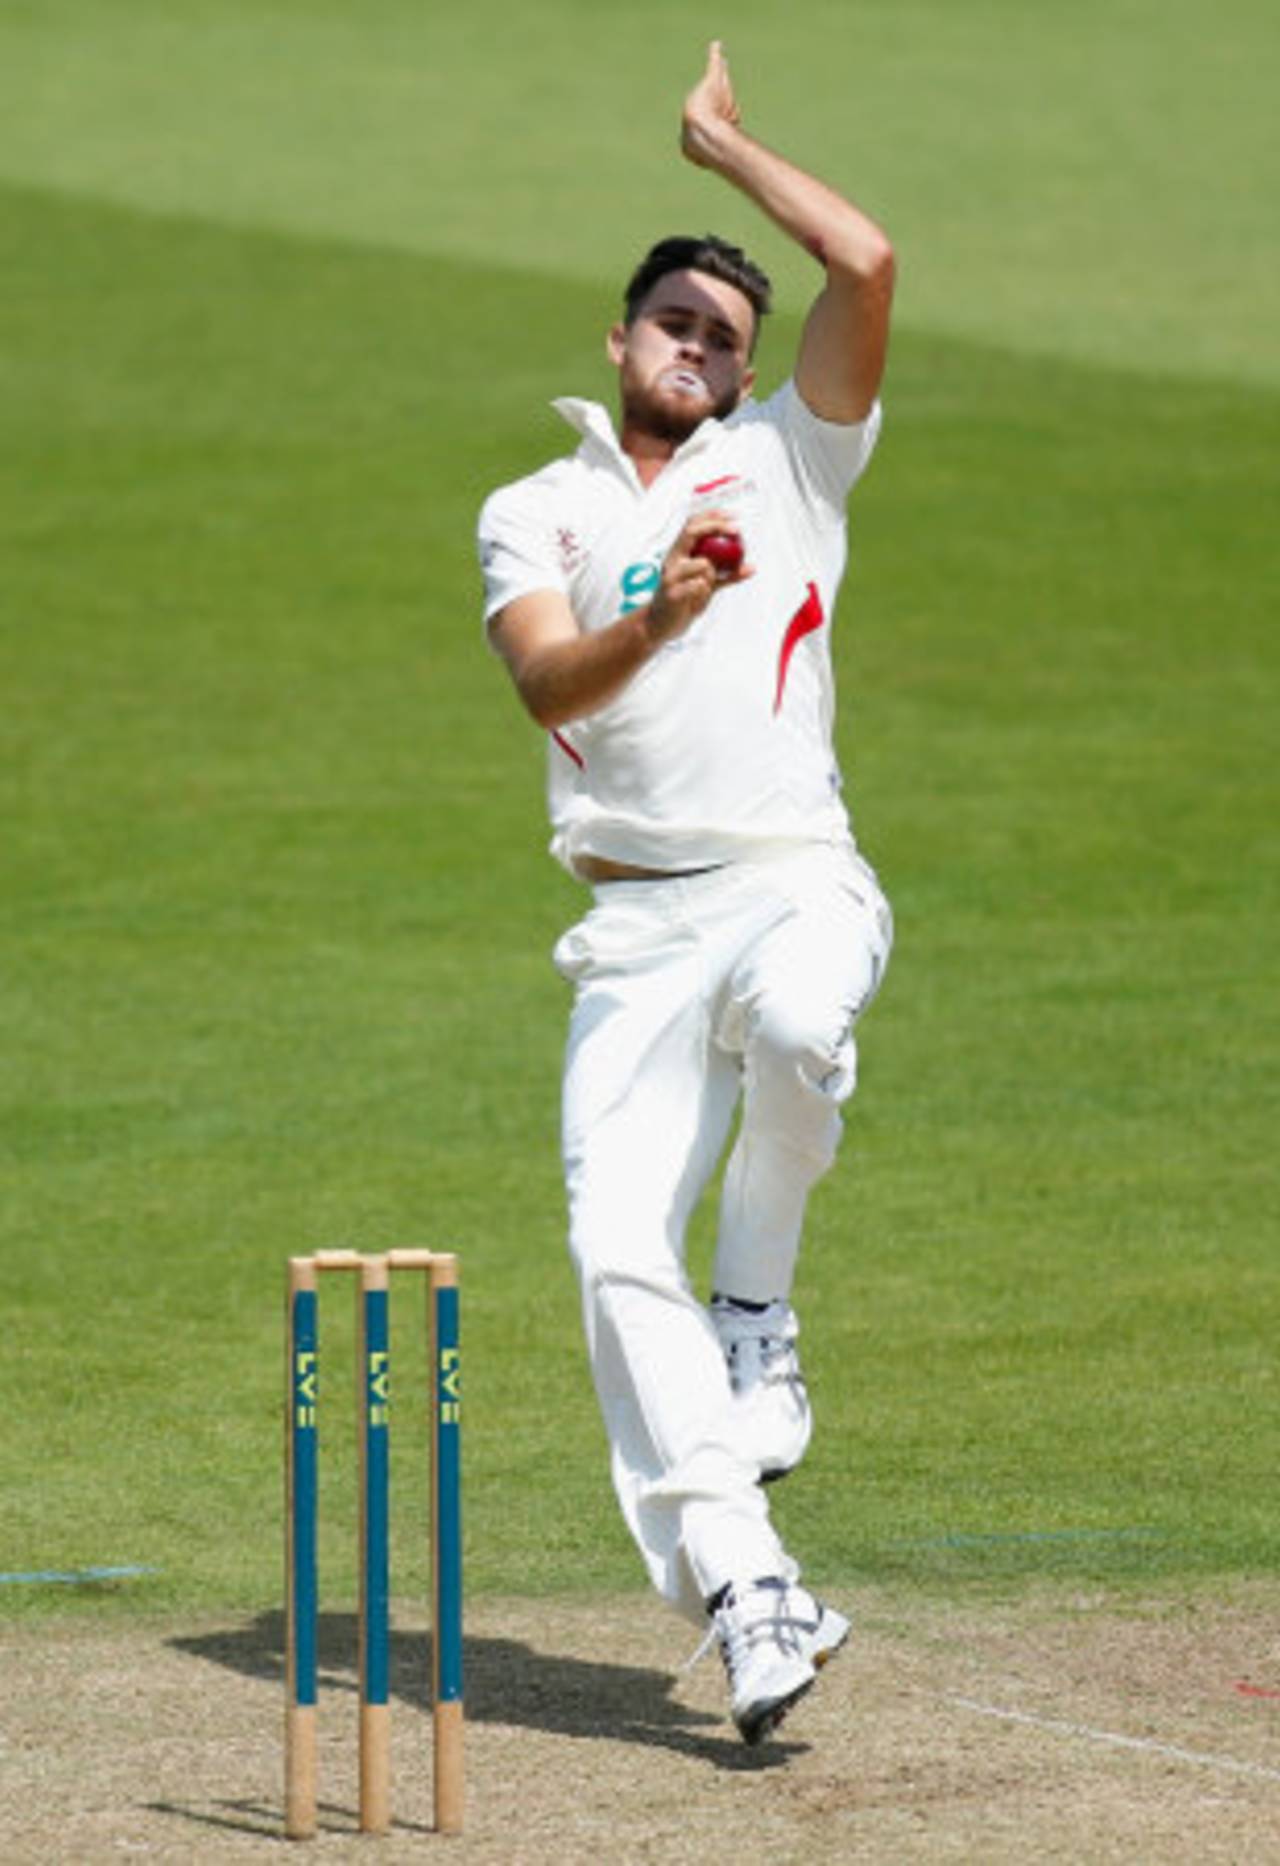 Nathan Buck took the opening wicket, Surrey v Leicestershire, County Championship Division Two, The Oval, 1st day, June 22, 2014